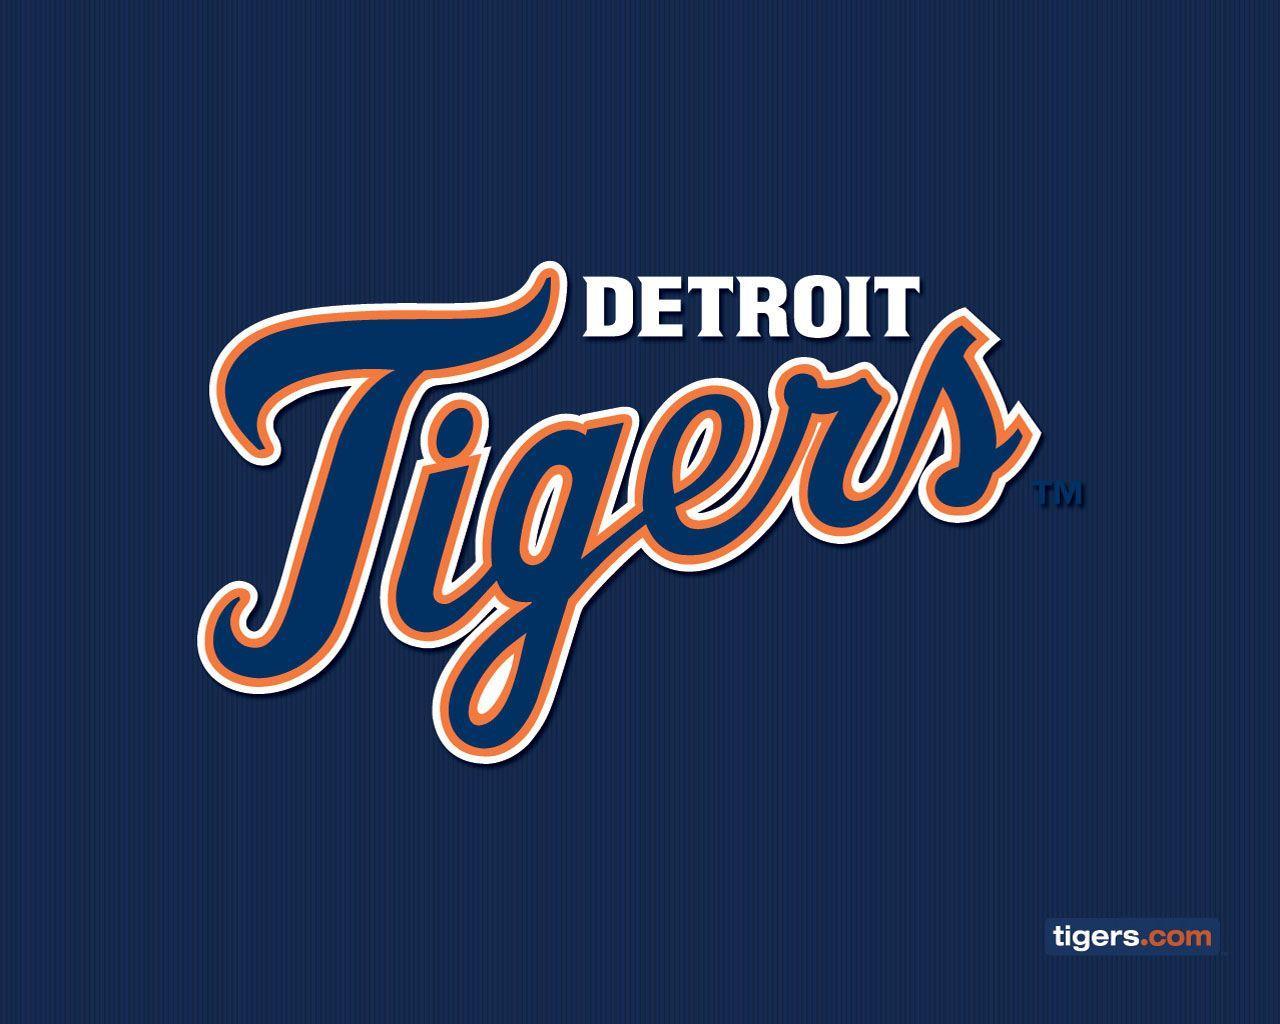 Detroit Tigers Wallpapers and Backgrounds Image